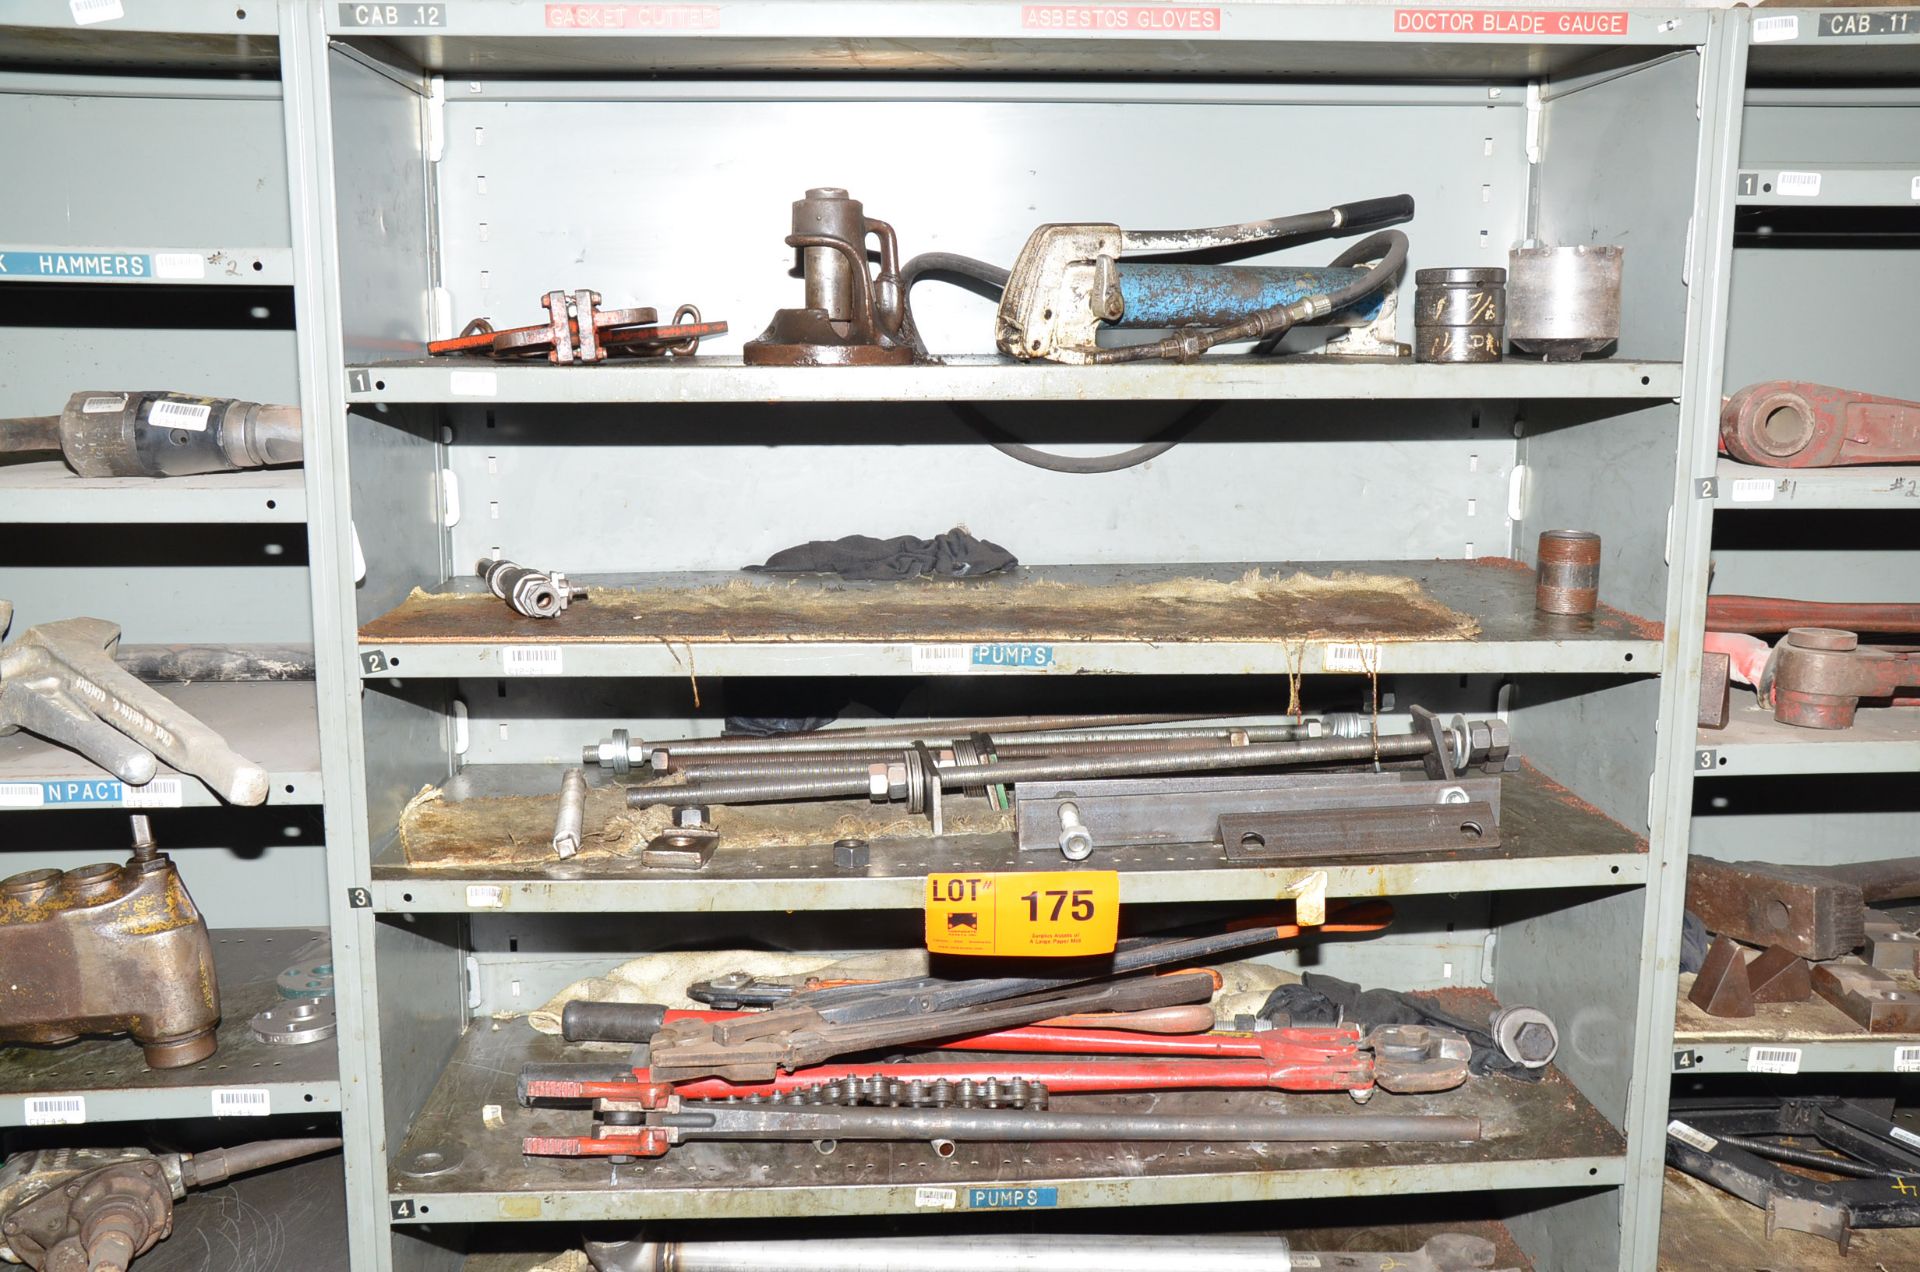 LOT/ CONTENTS OF SHELF - INCLUDING HYDRAULIC PUMPS, BOLT CUTTERS, STRAPPING TOOLS, PIPE CUTTERS [ - Image 2 of 3